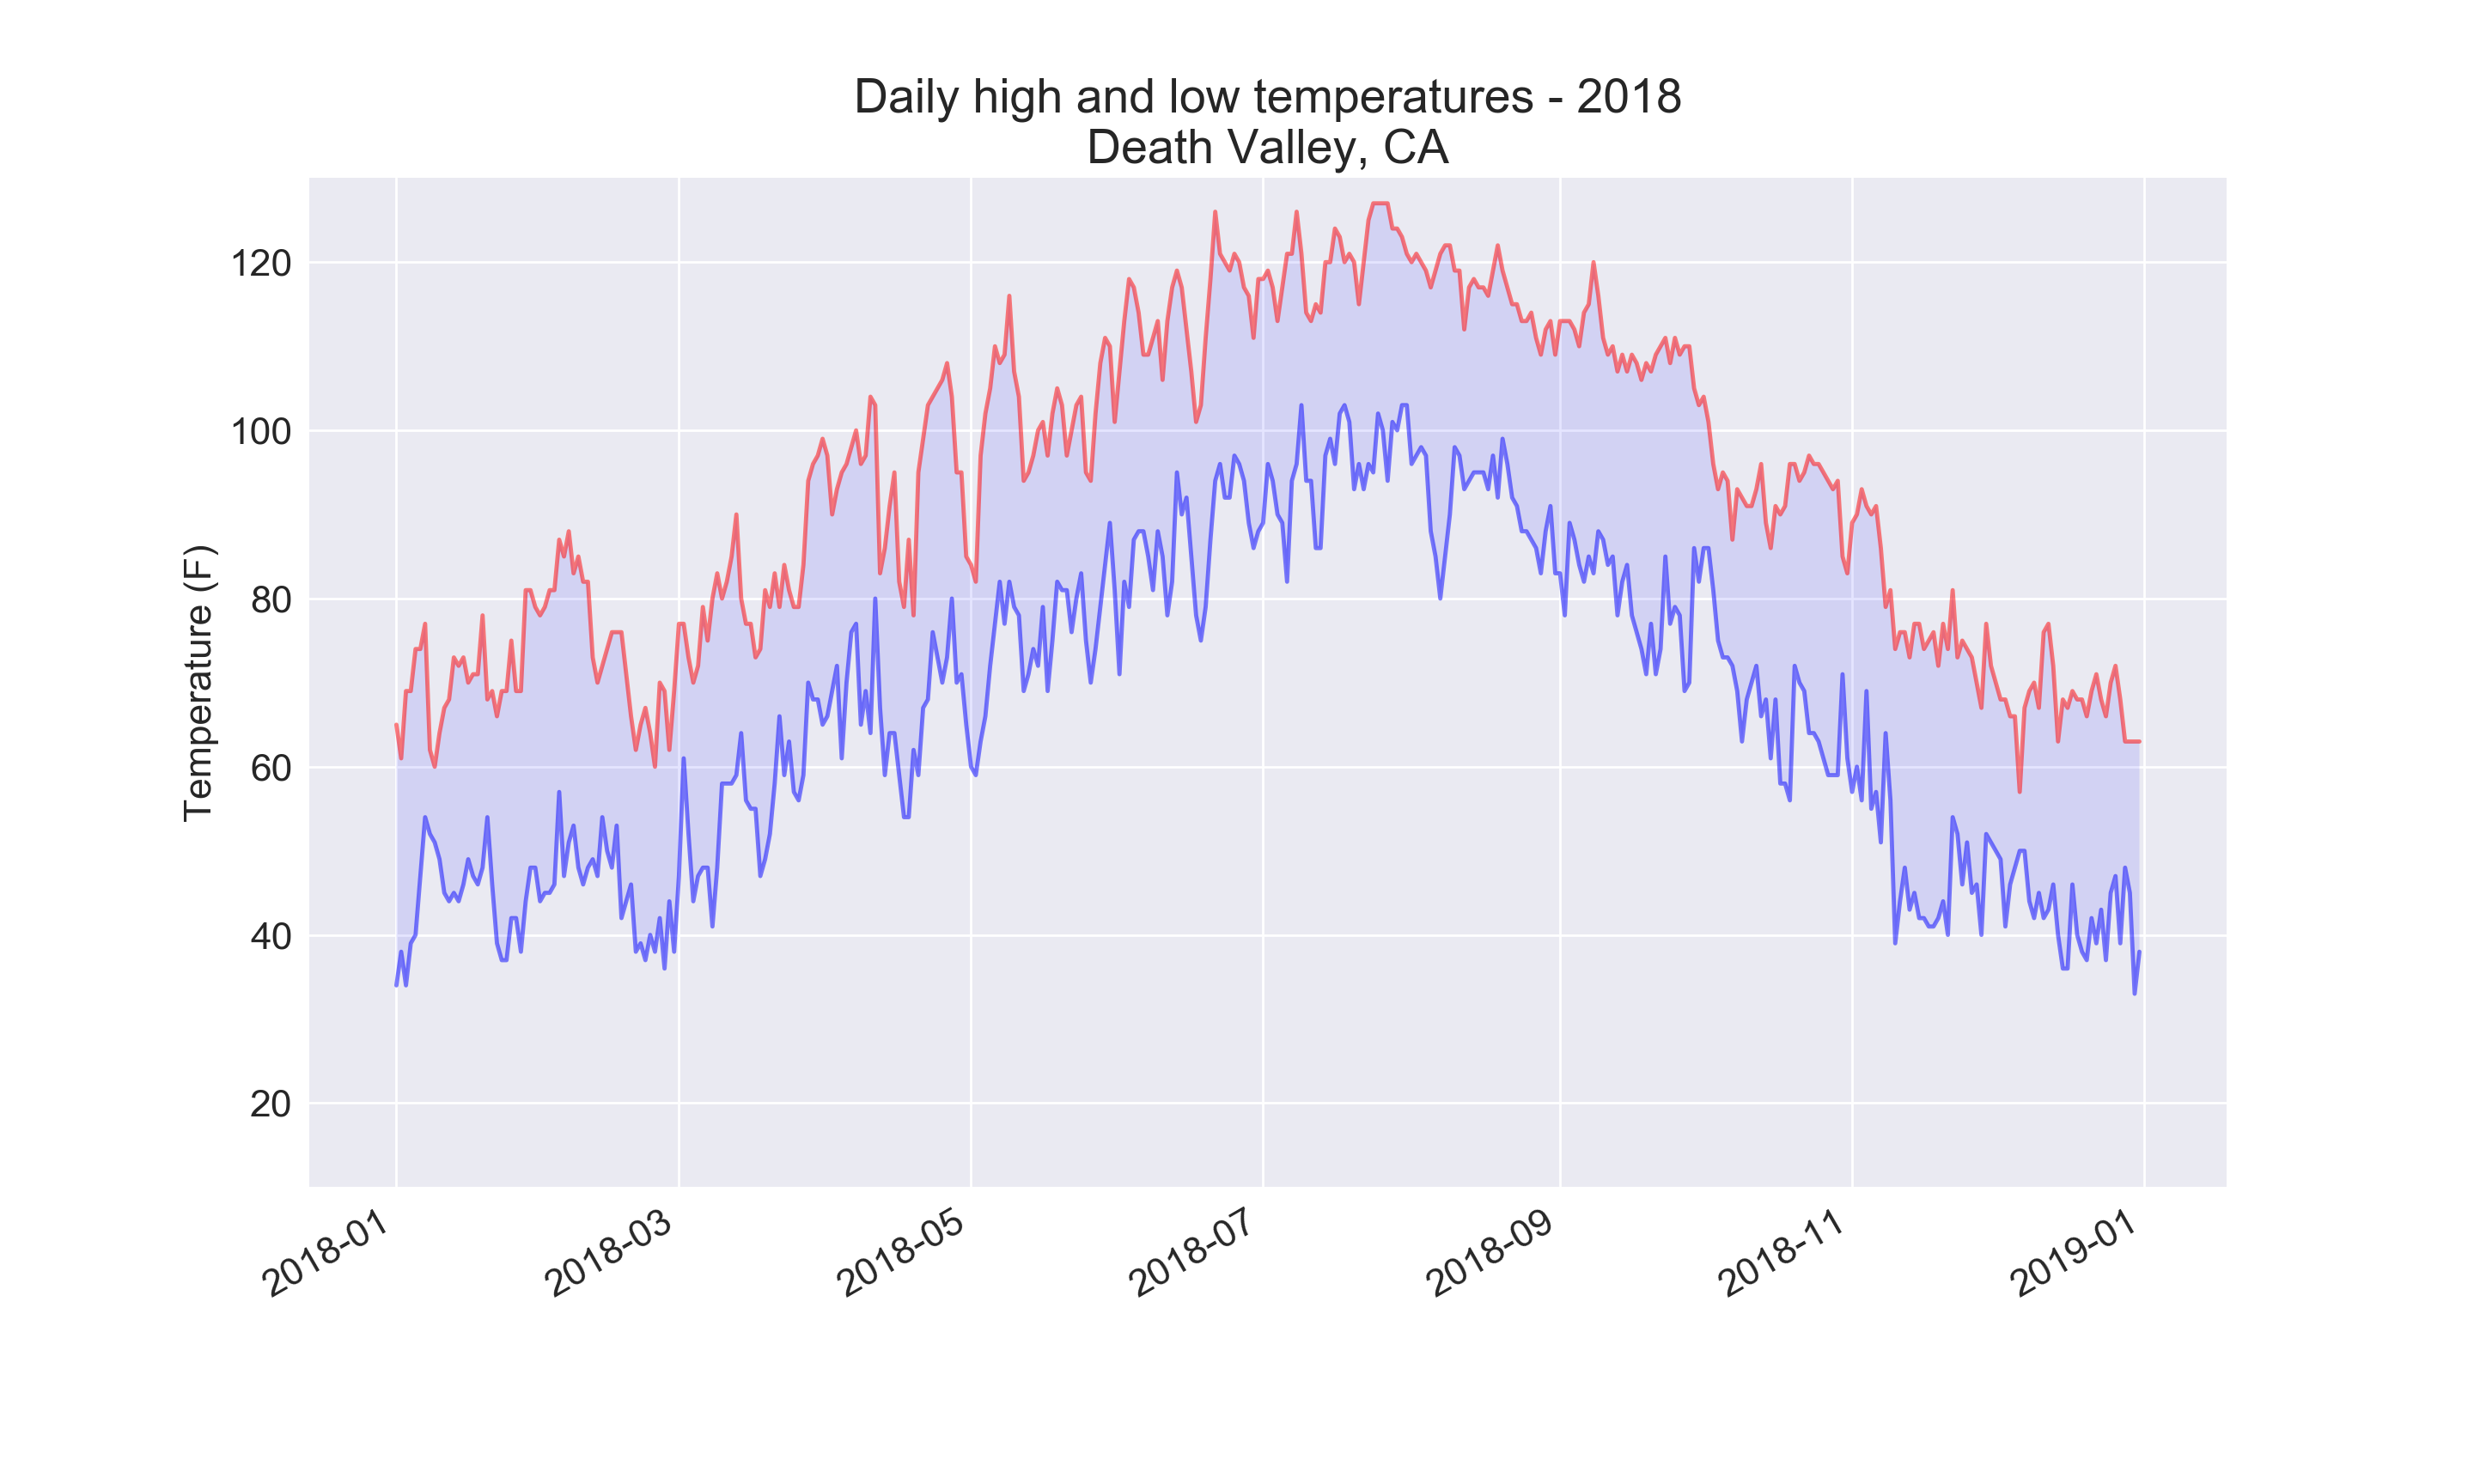 Daily high and low temperatures for Death Valley in 2018